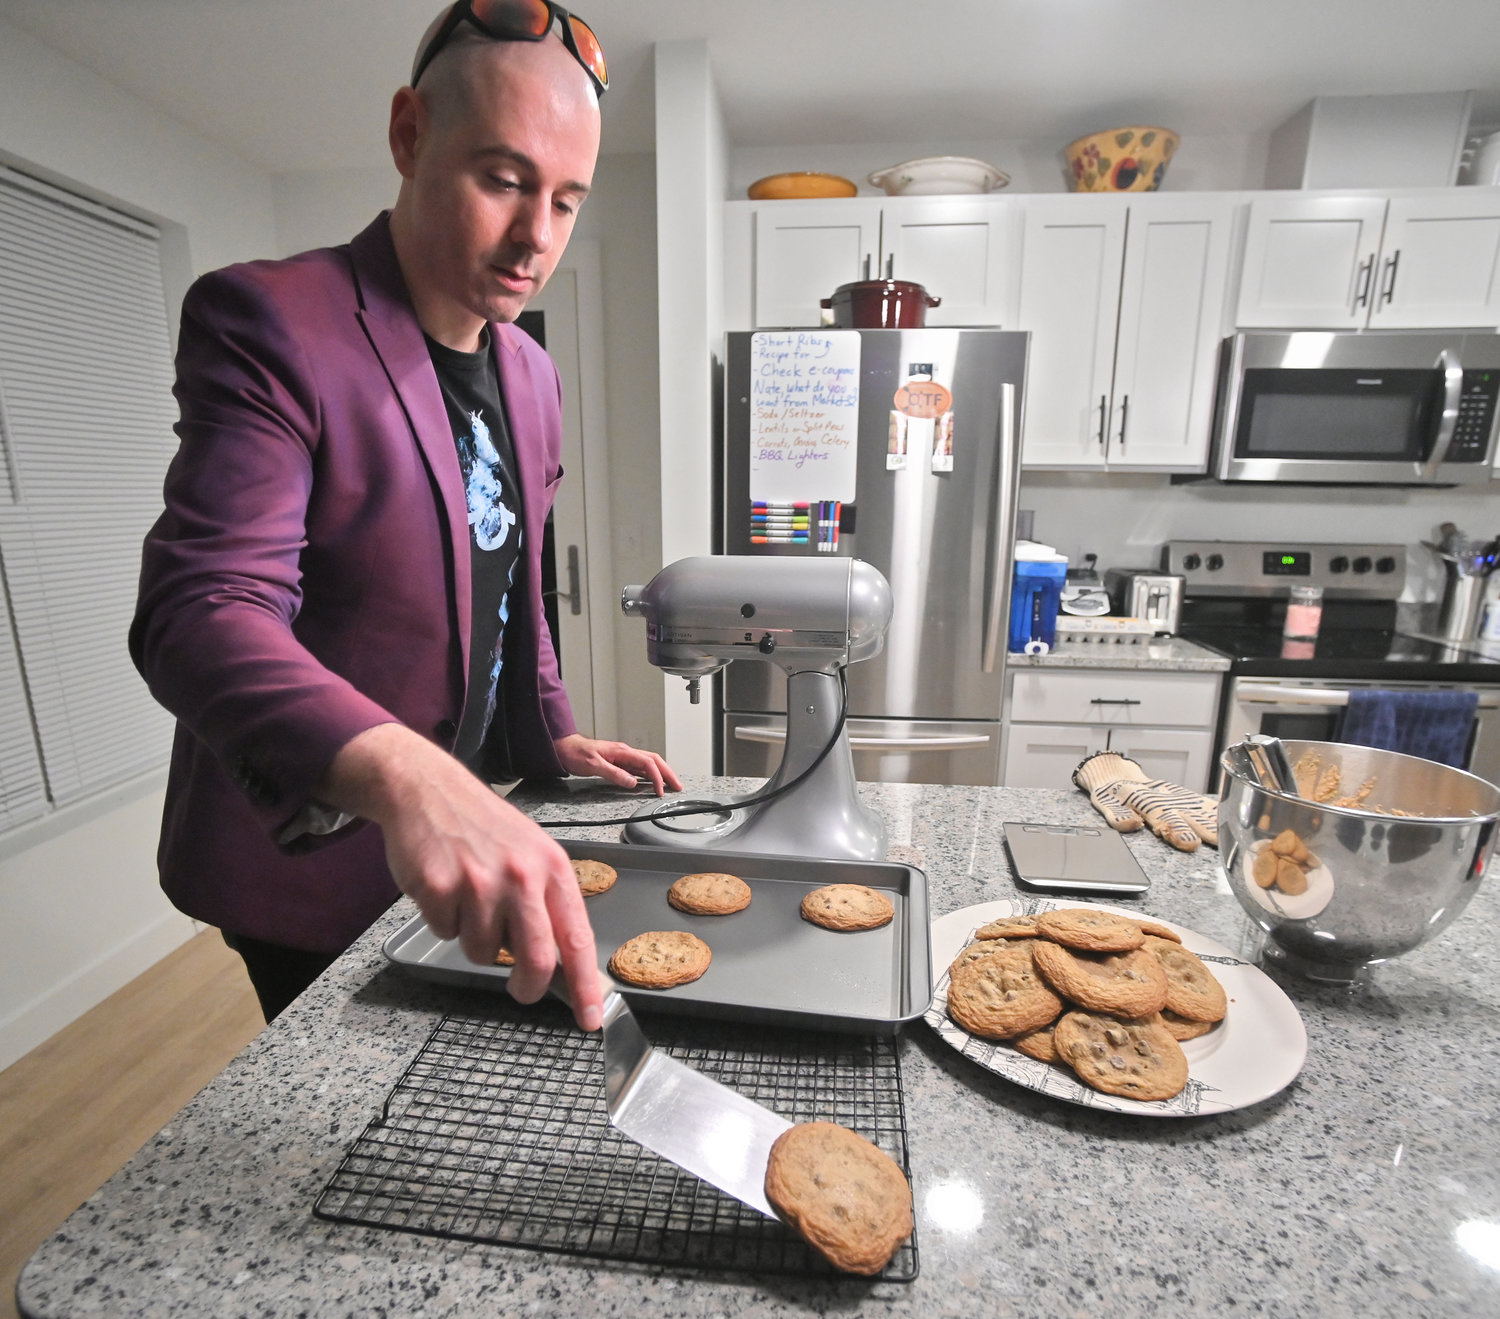 James Daino transfers chocolate chip cookies from the cookie sheet to the cooling rack Nov. 9 in his Rome kitchen. Daino has just been eliminated after a long run in the Bake from Scratch magazine 2022 Greatest Baker competition.